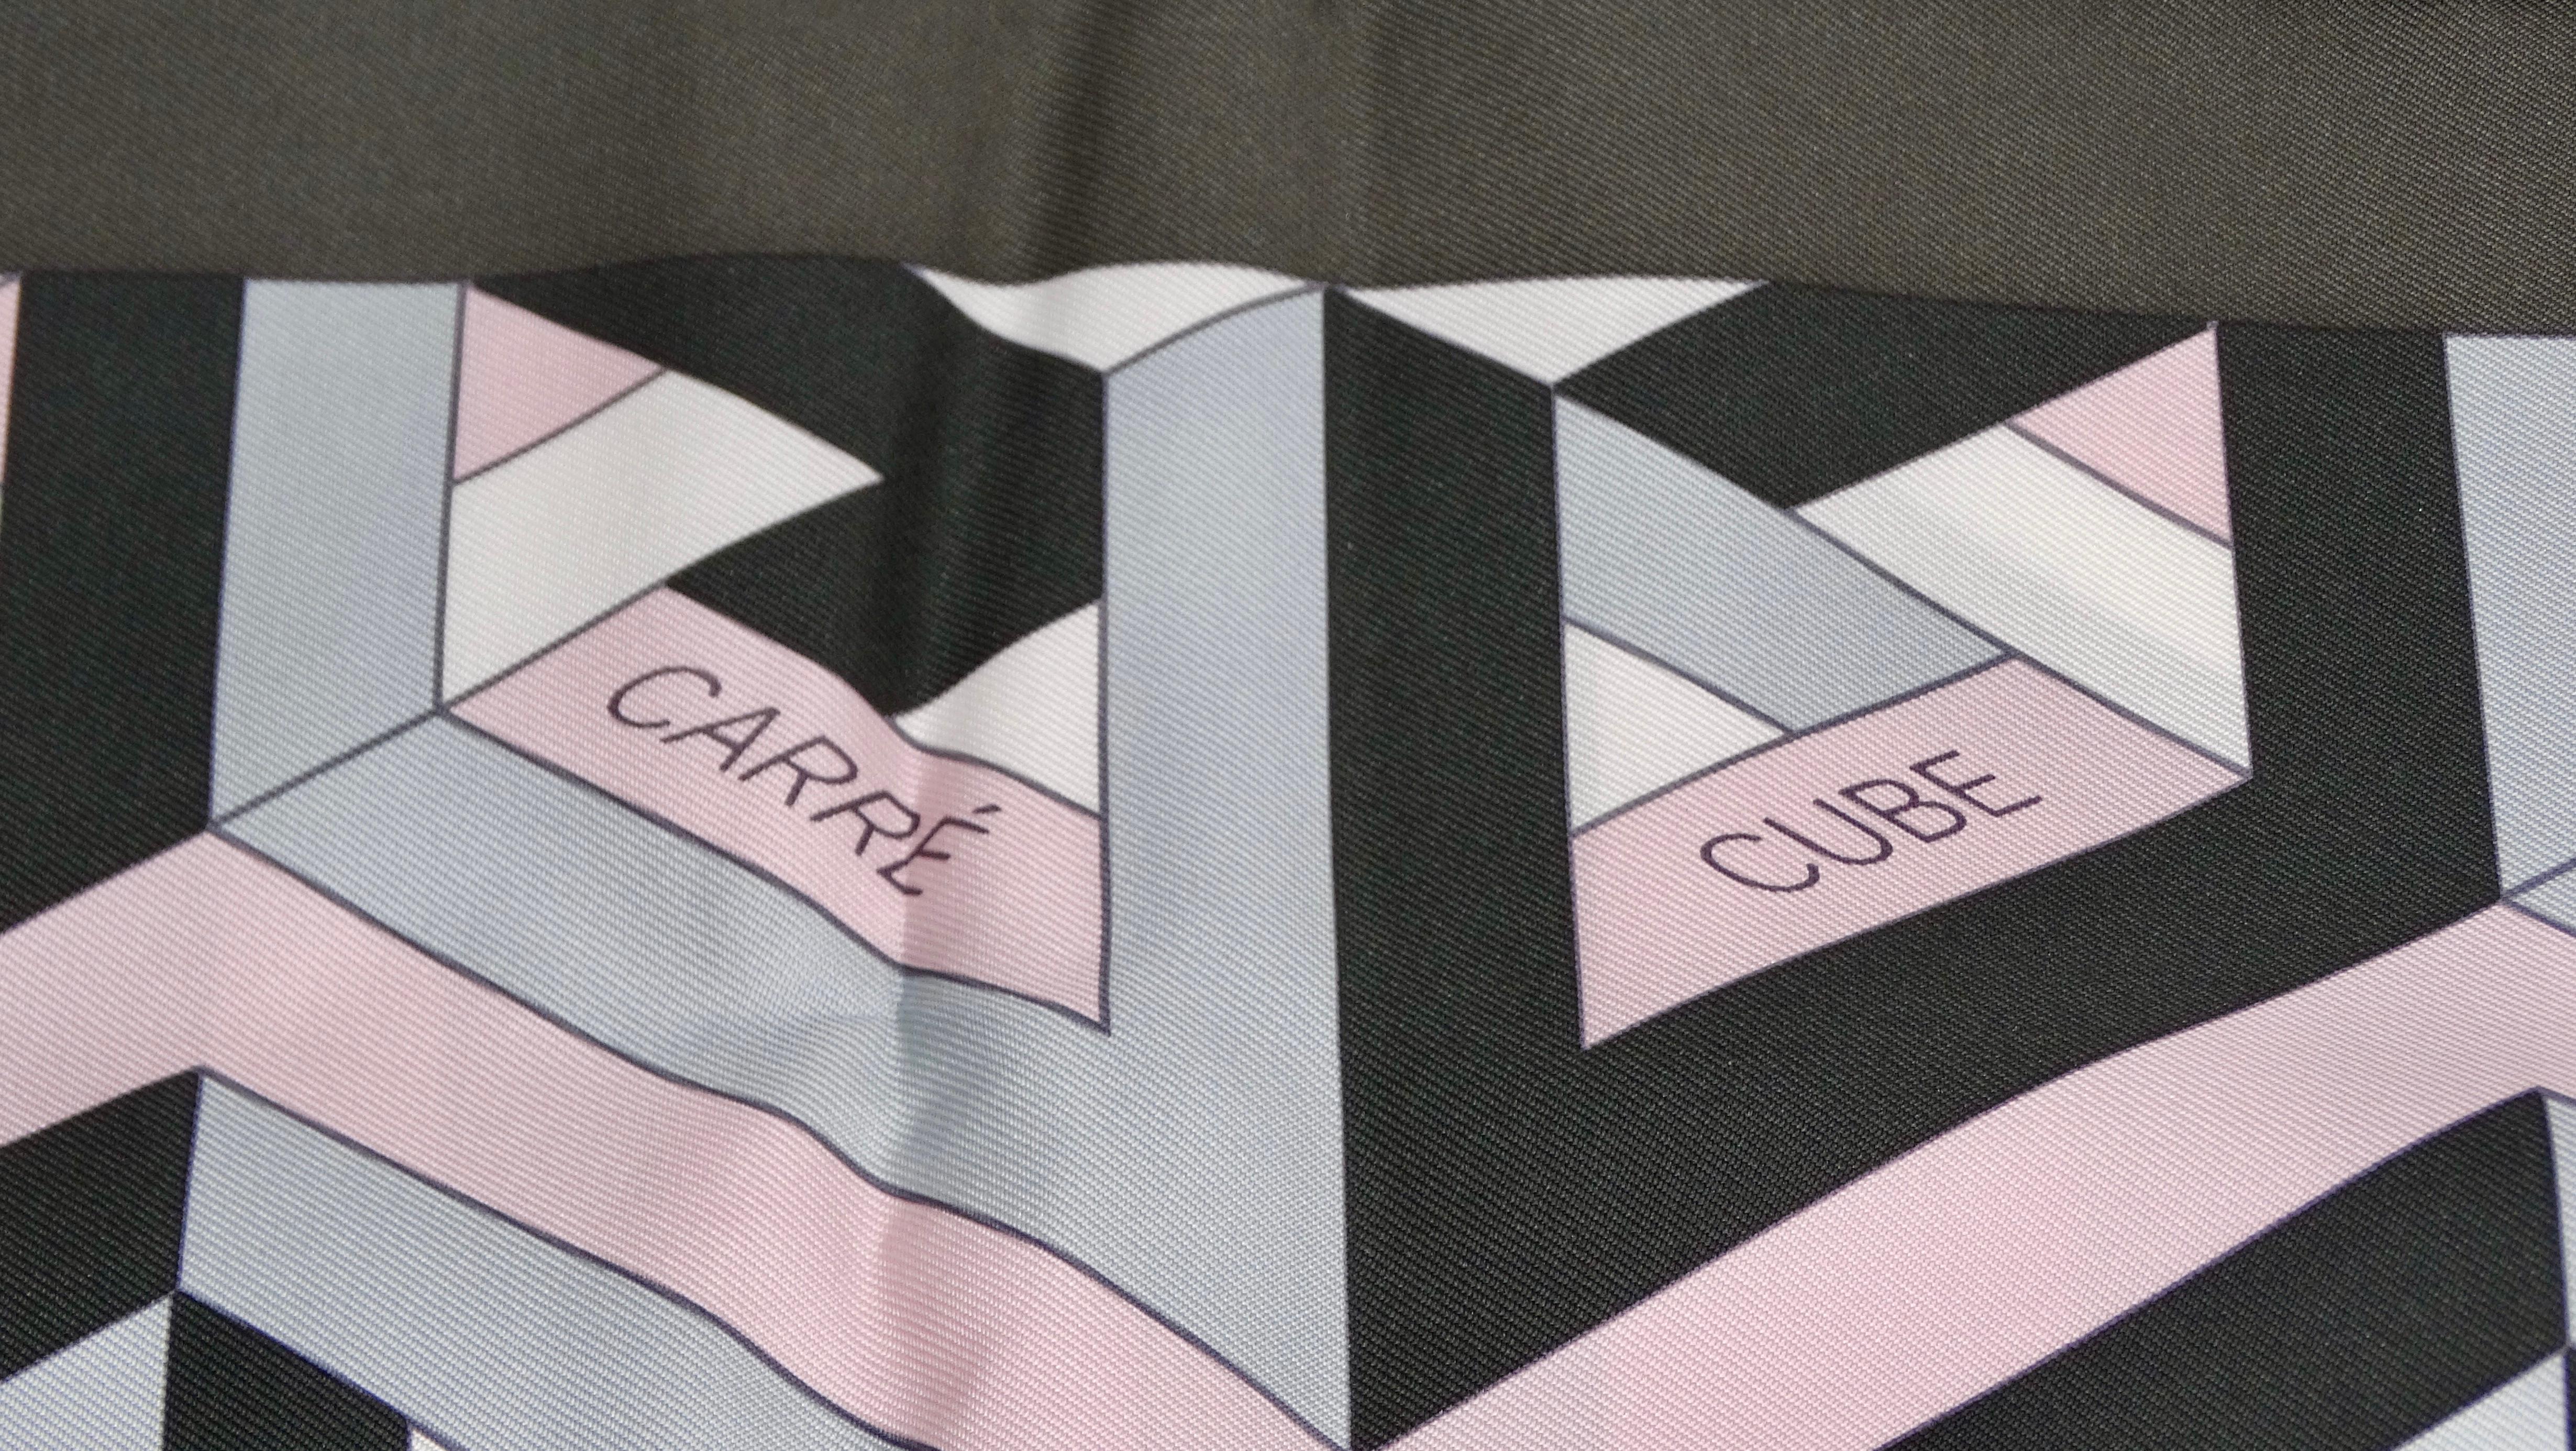 Gray Hermes Carre Cube 2013 Scarf